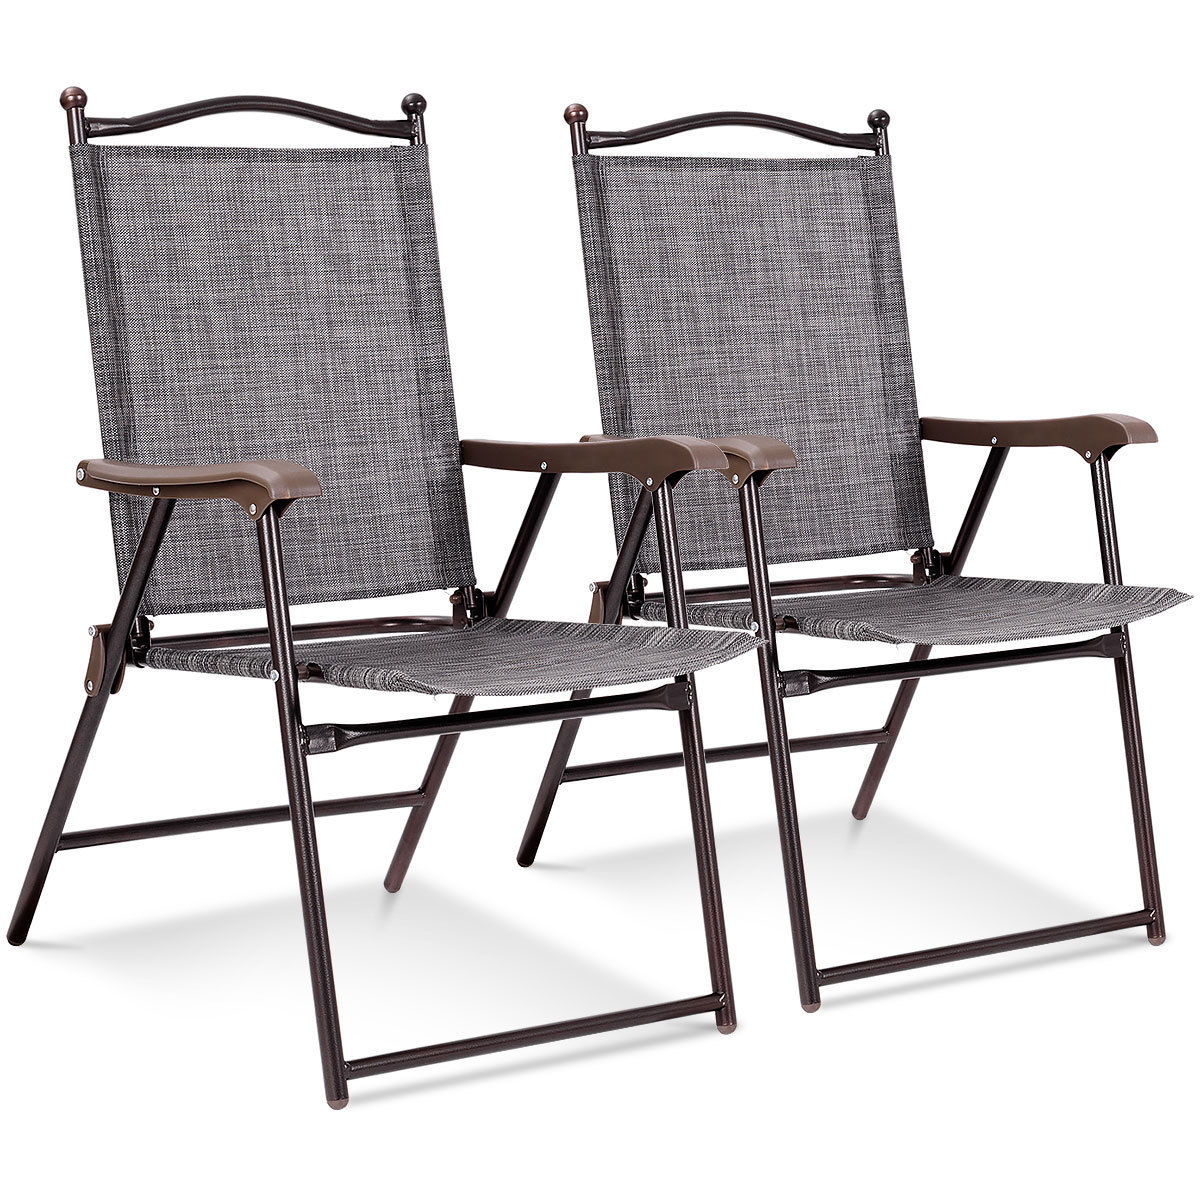 Costway Set of 2 Patio Folding Sling Back Chairs Camping Deck Garden Beach Gray - image 1 of 9